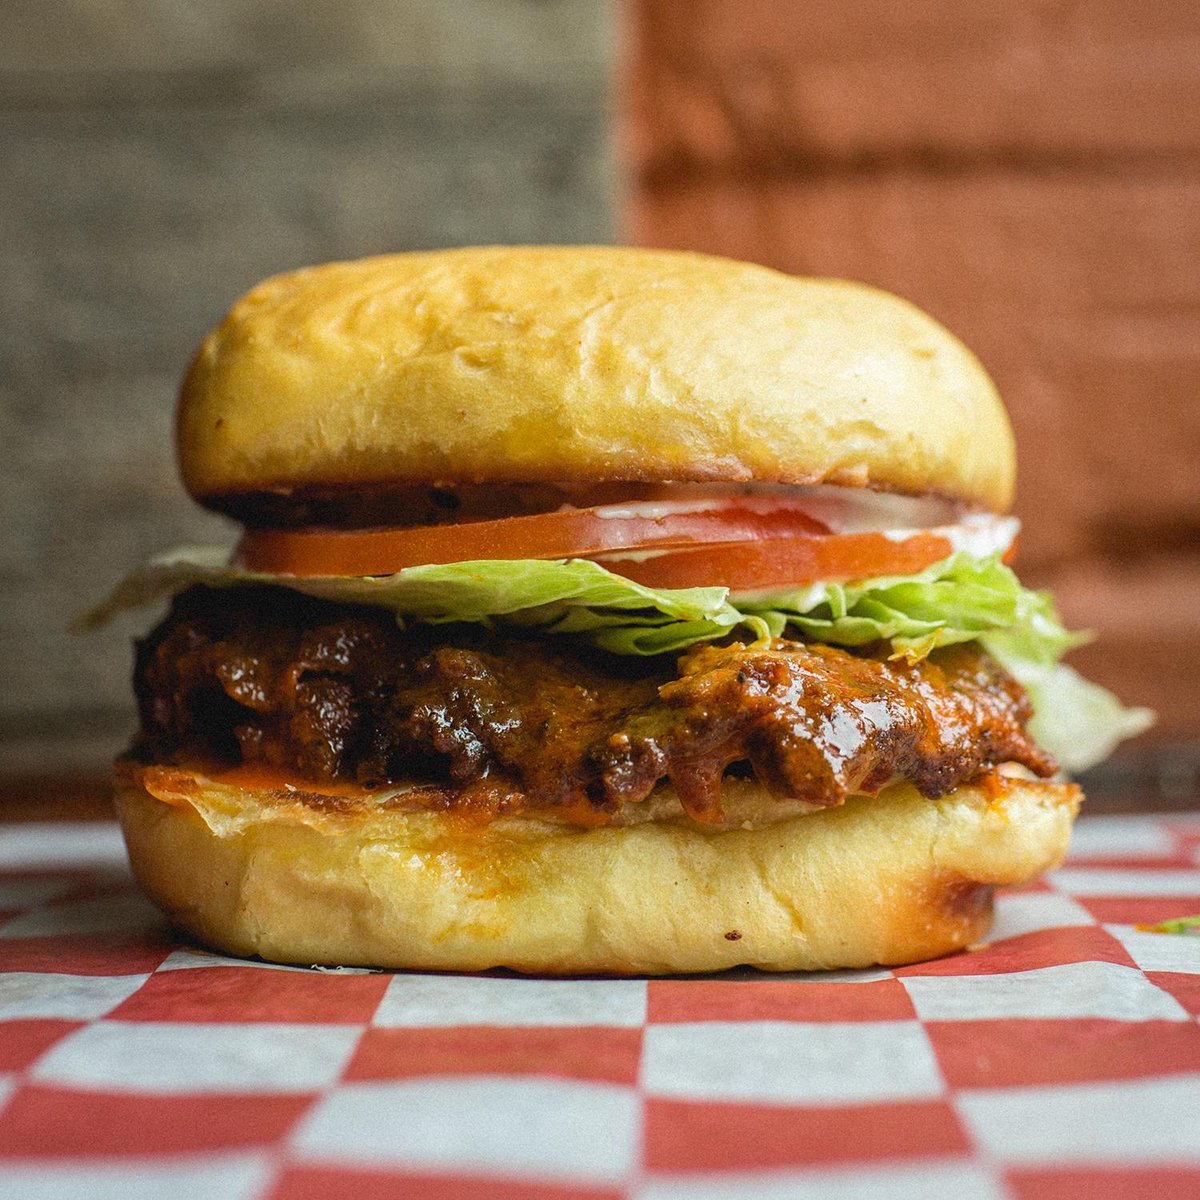 This week's special: #BuffaloChickenSandwich - Blue cheese ranch, Tomato, Lettuce, Fried chicken in Frank's hot sauce